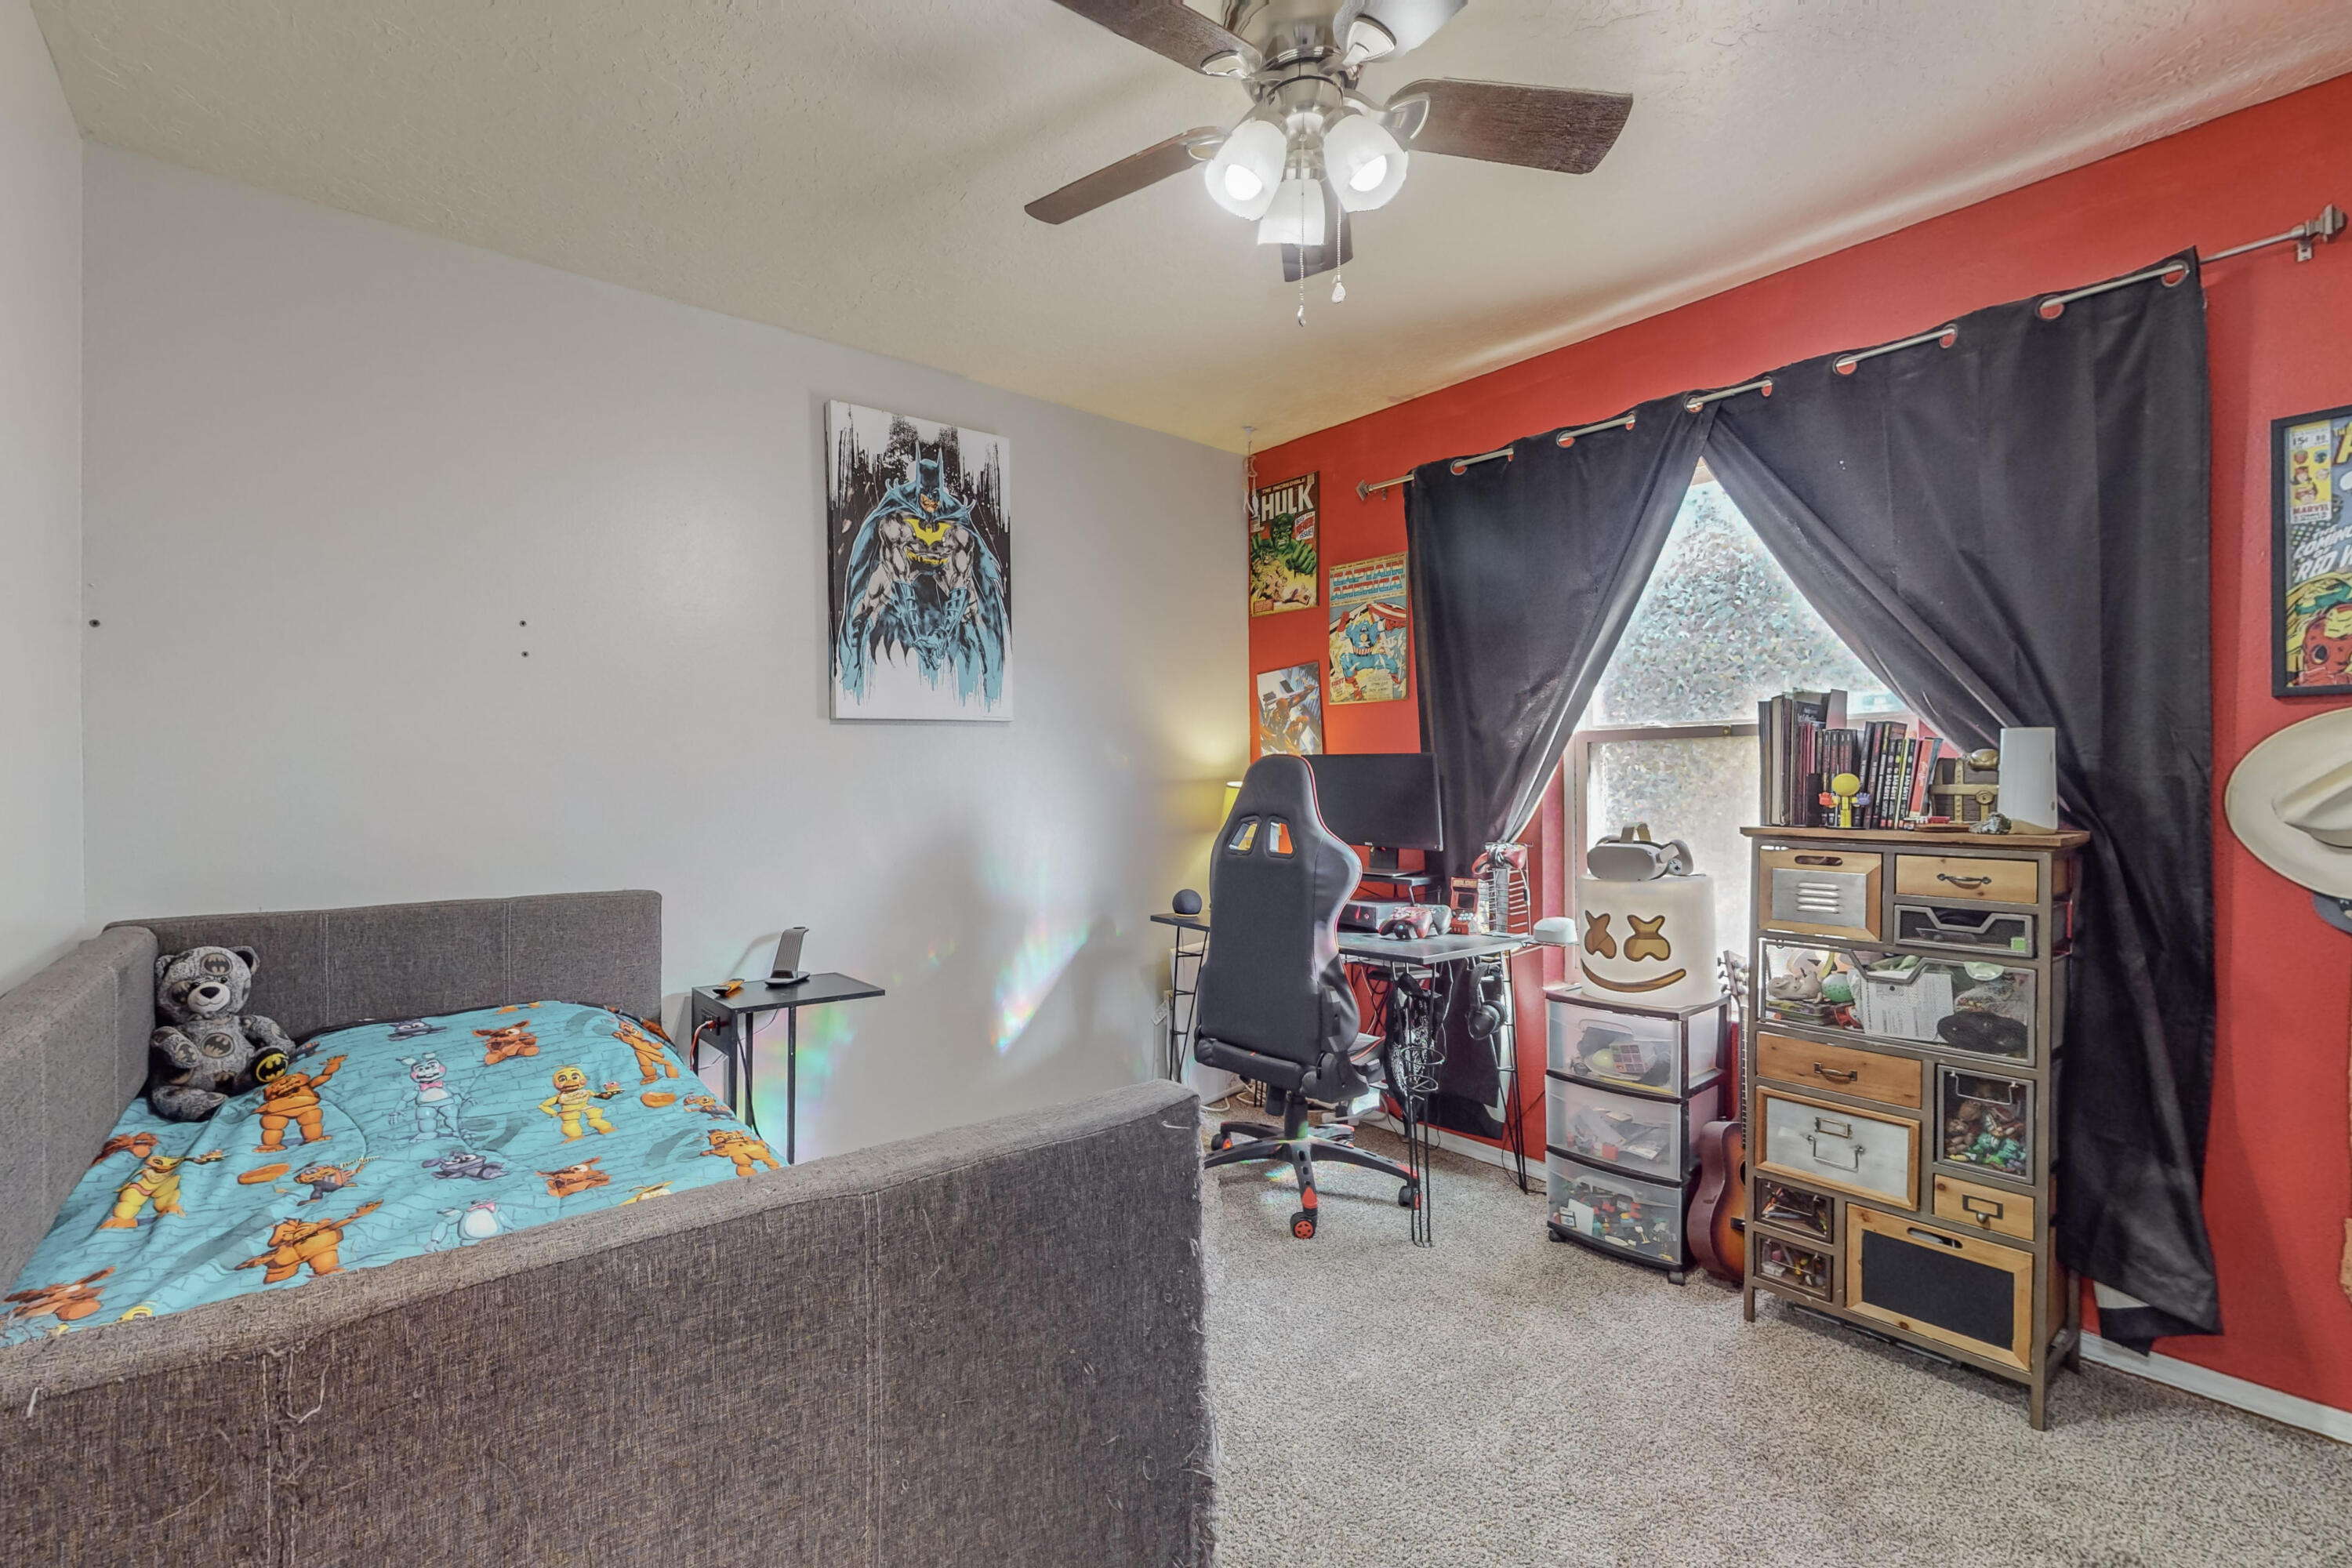 1705 32nd Street SE, Rio Rancho, New Mexico 87124, 3 Bedrooms Bedrooms, ,2 BathroomsBathrooms,Residential,For Sale,1705 32nd Street SE,1043905